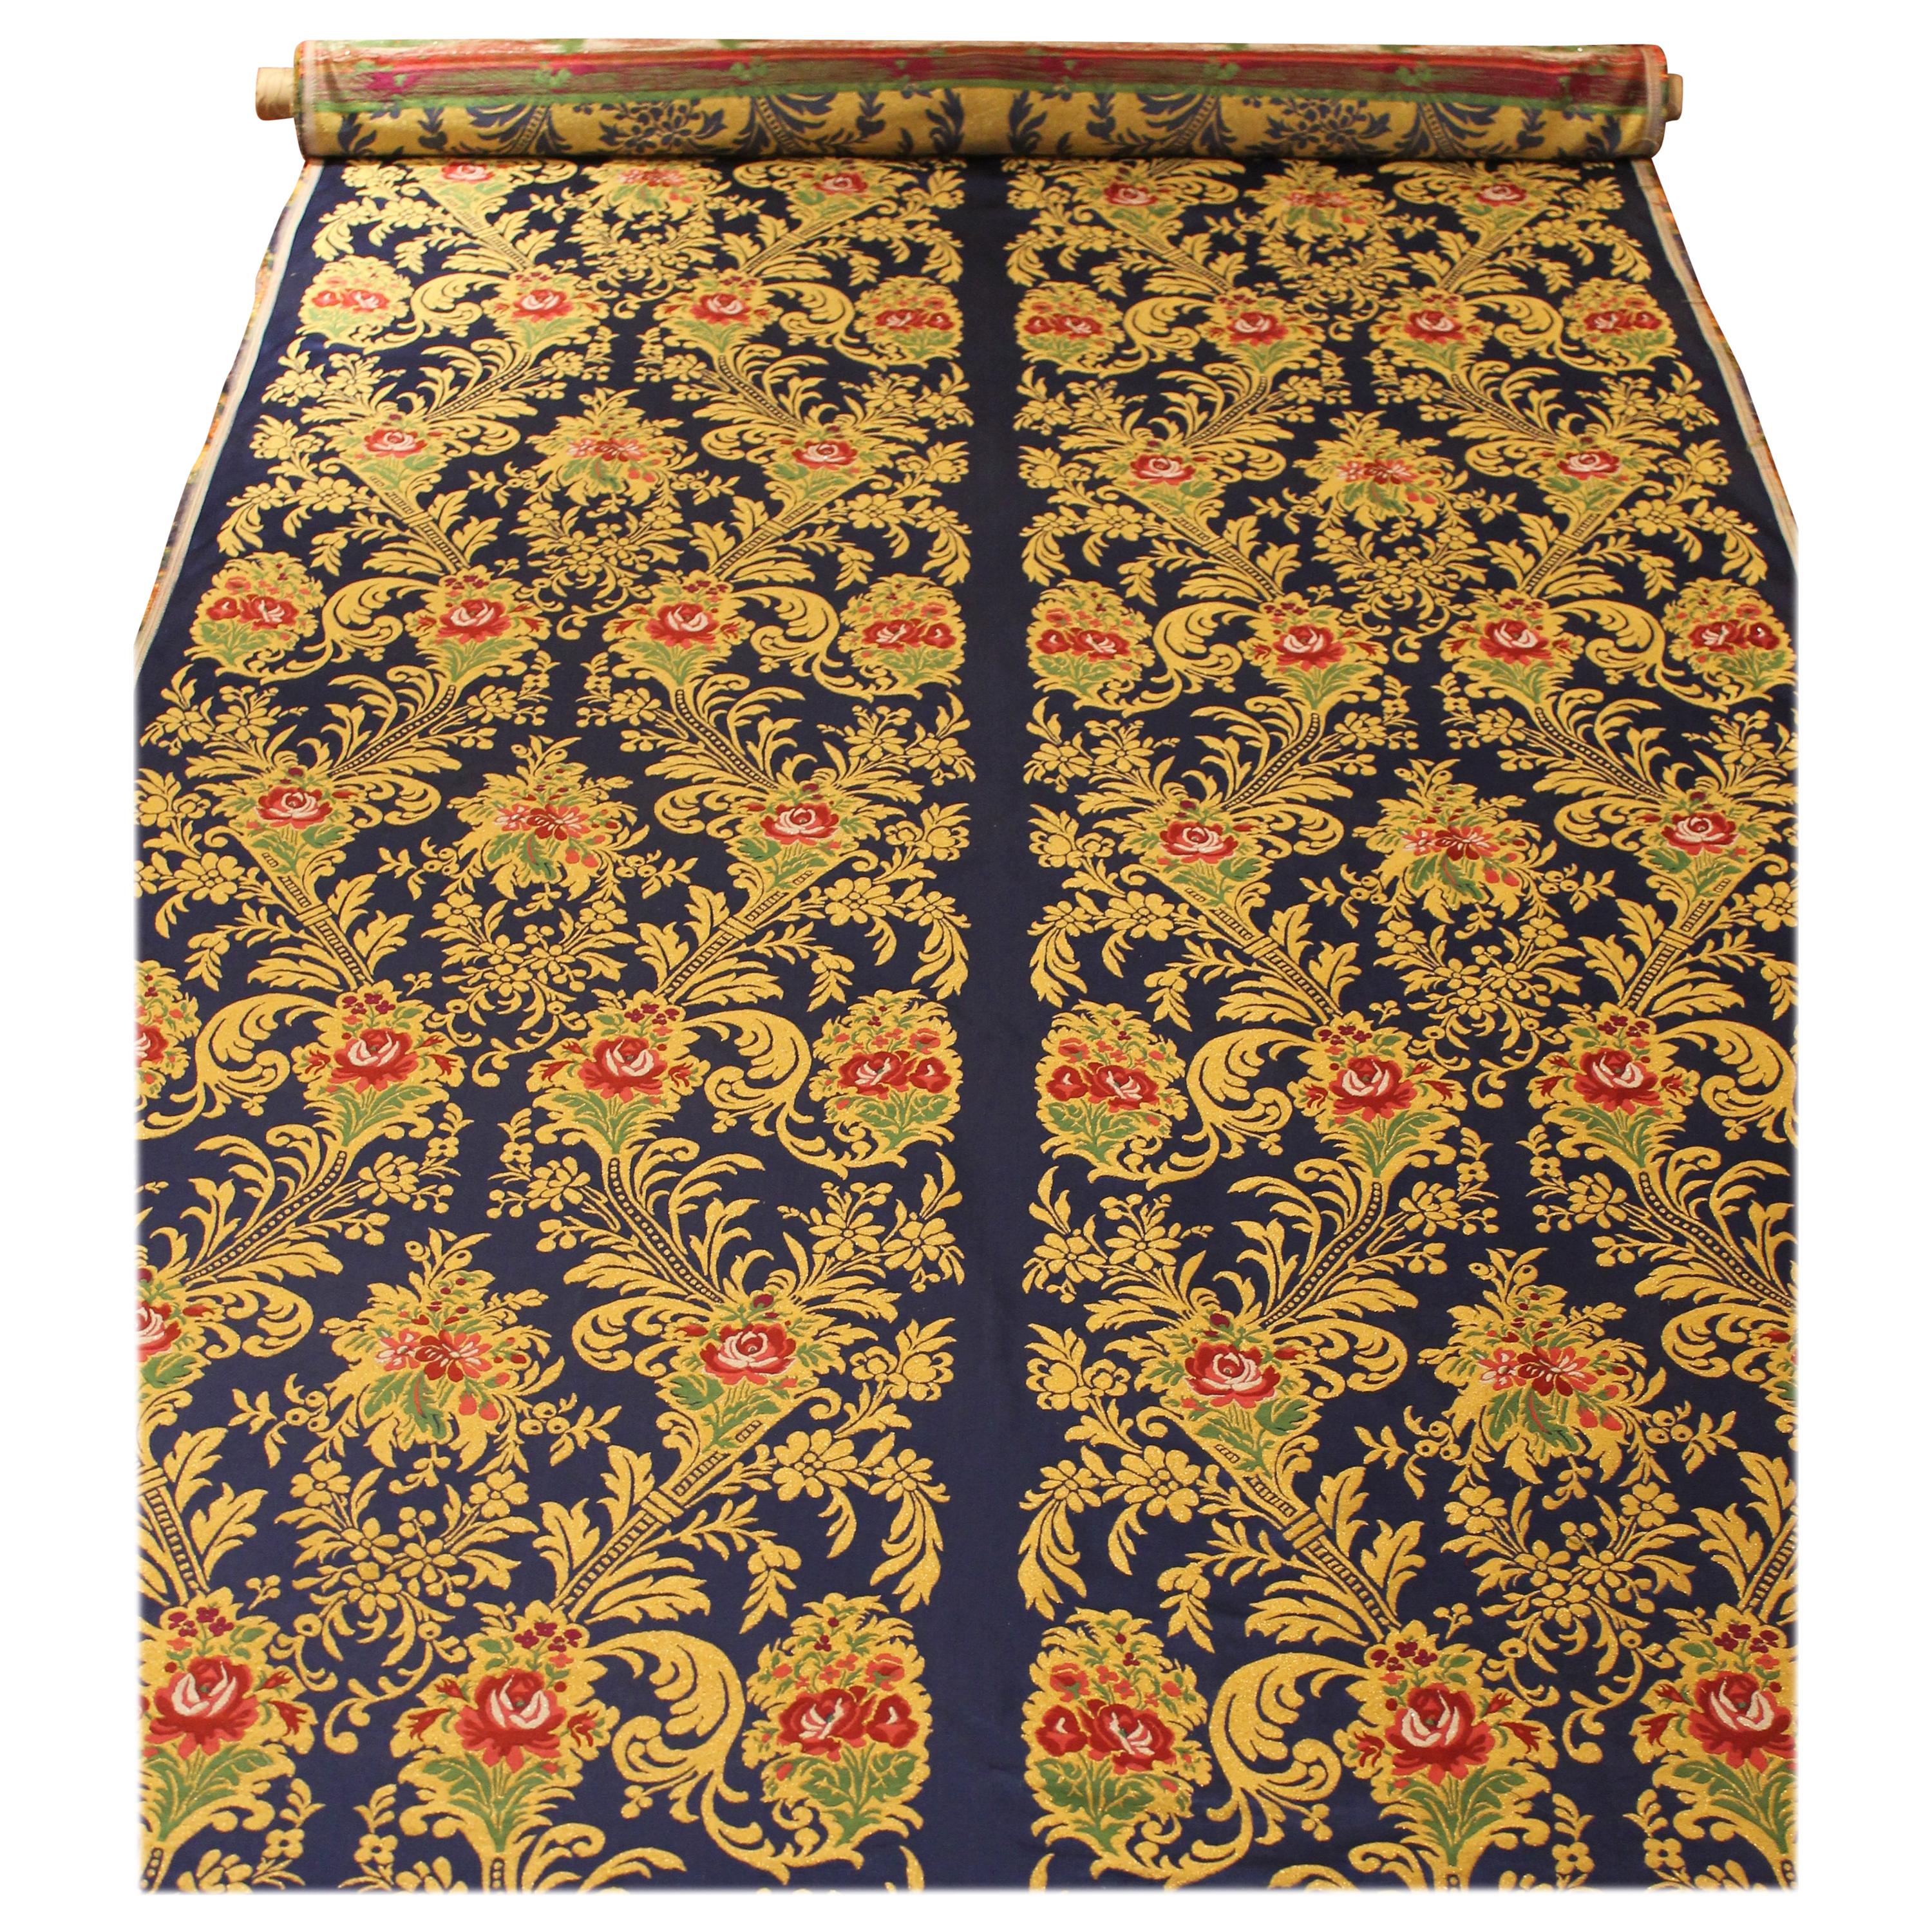 Italian Blue Silk Blend Brocade Fabric with Red Roses and Gold Floral Patterns